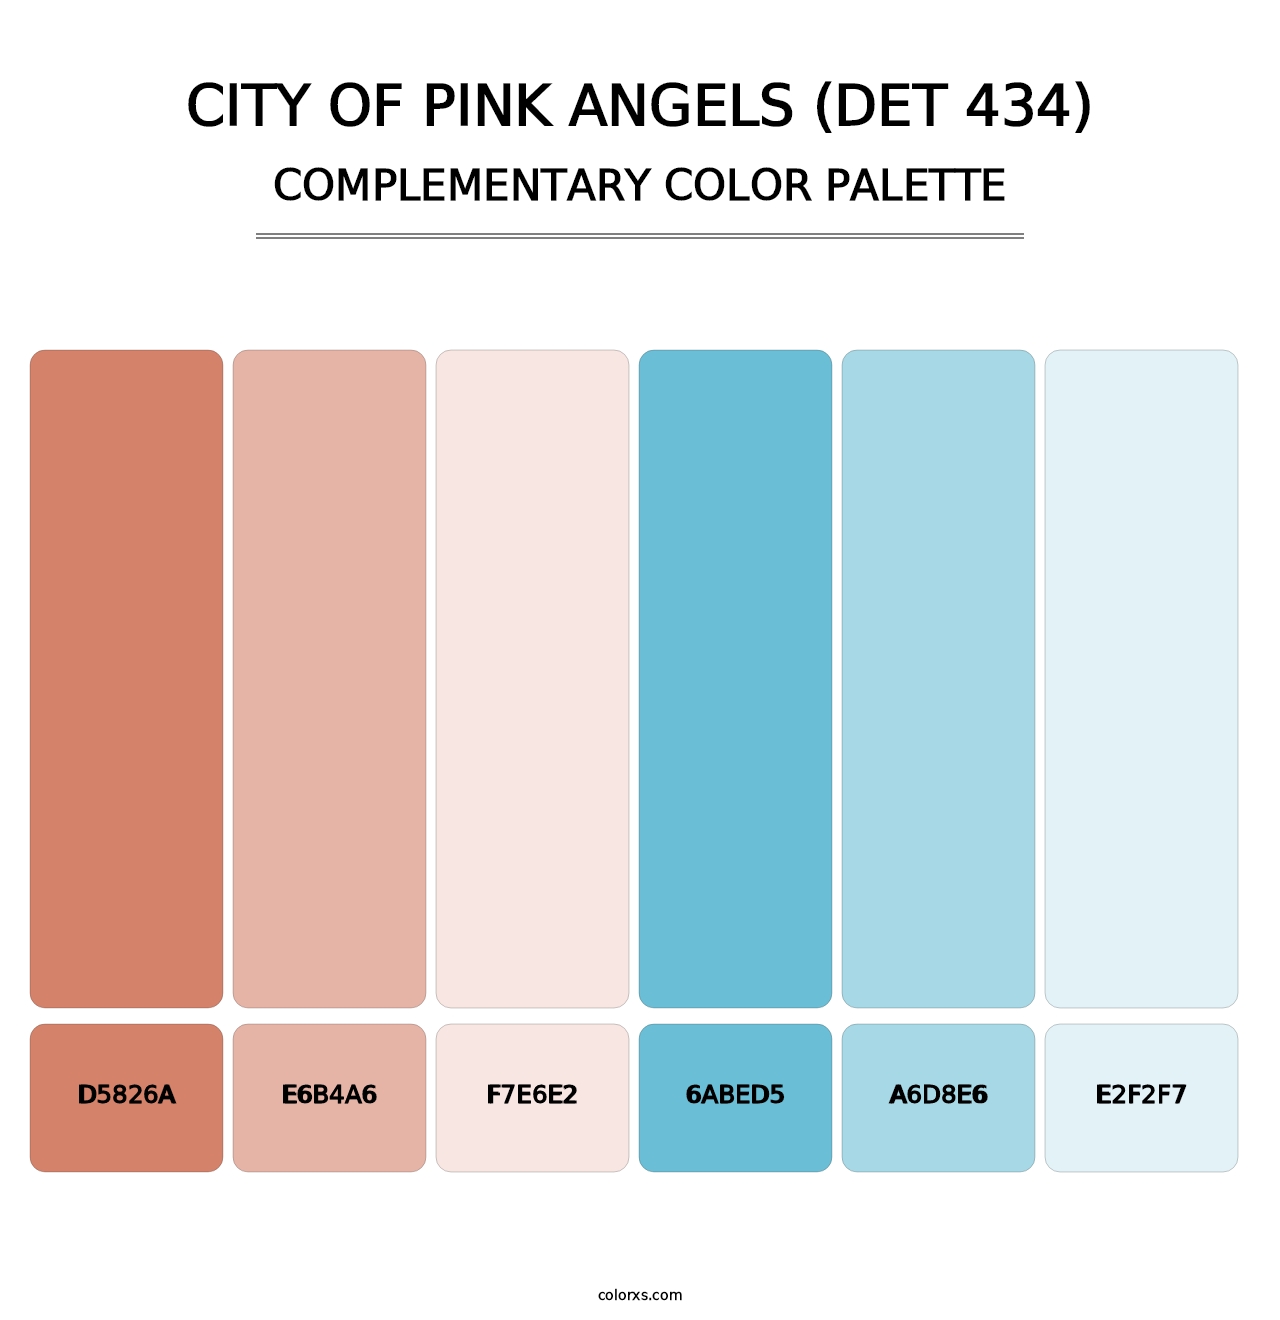 City of Pink Angels (DET 434) - Complementary Color Palette